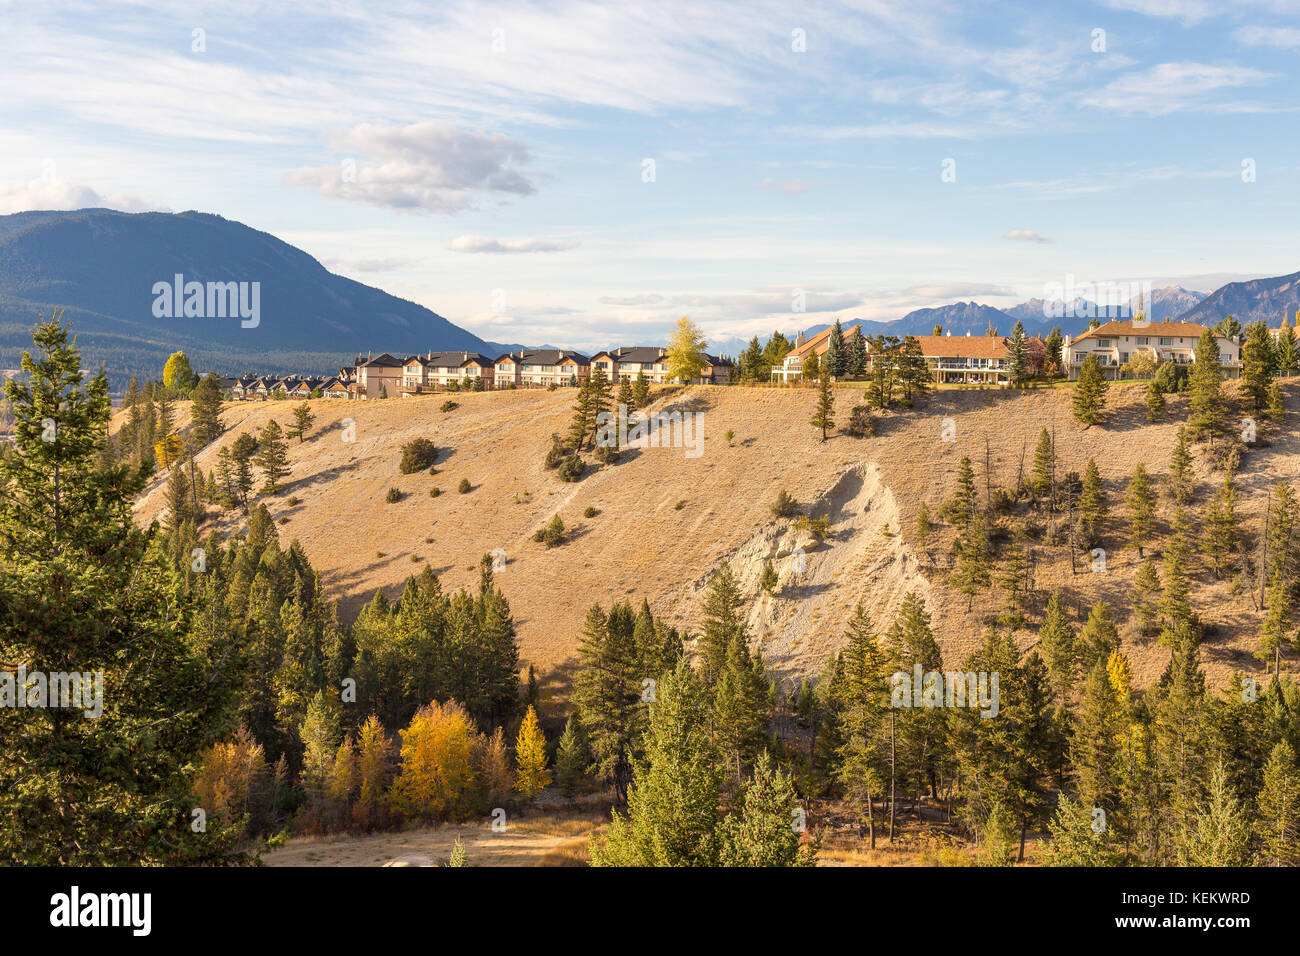 View of Radium Hot Springs in BC, Canada. Stock Photo